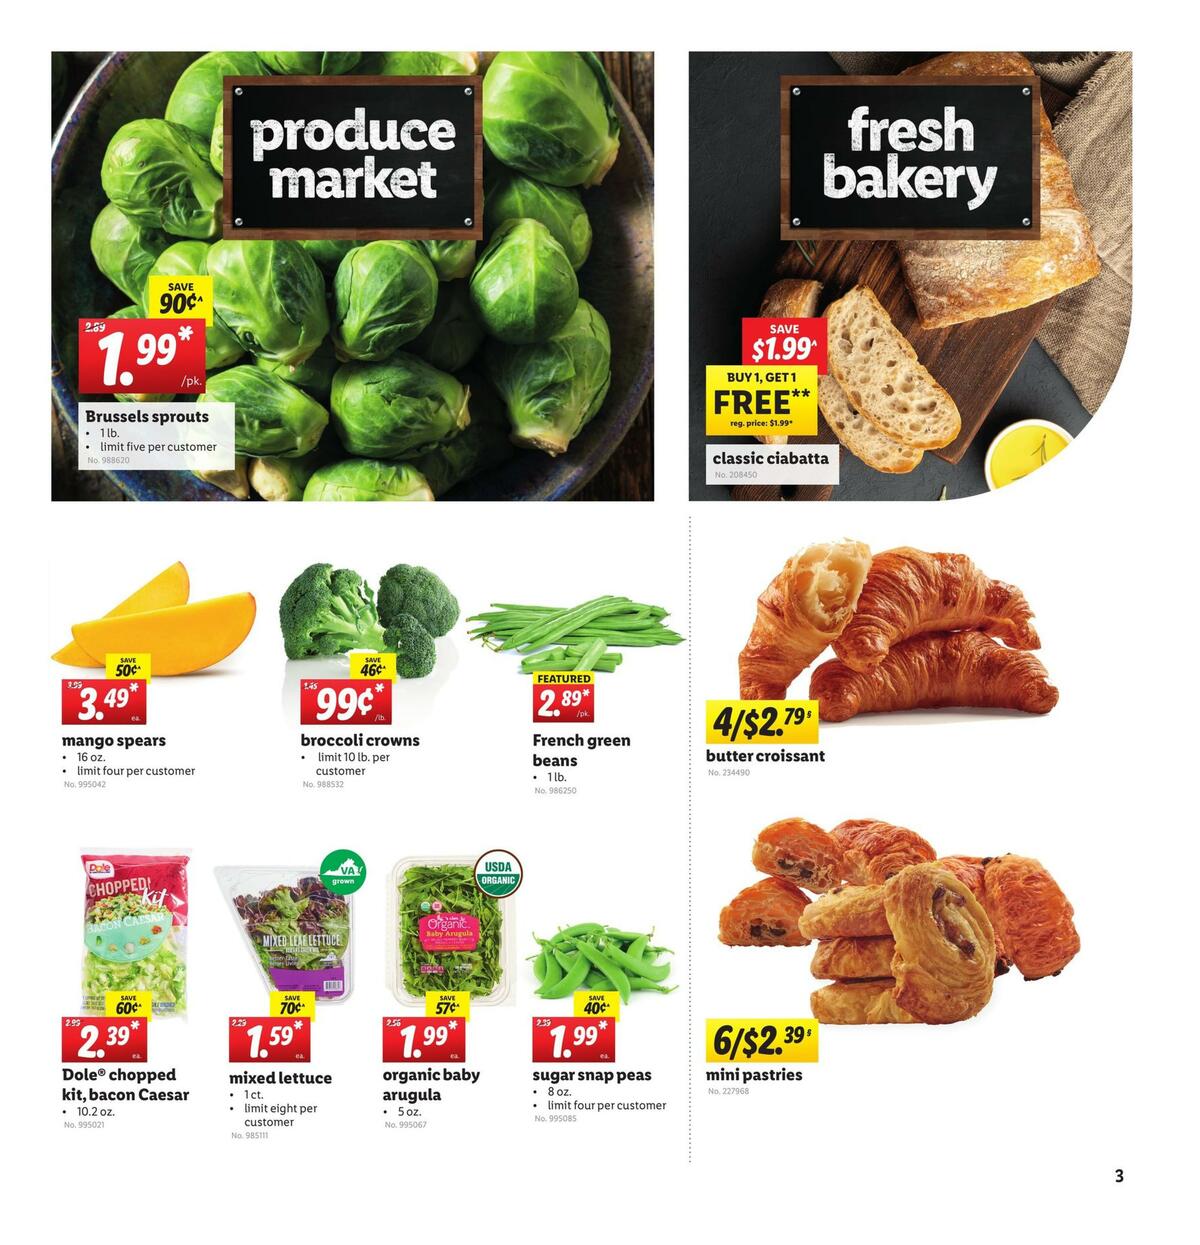 LIDL Weekly Ad from May 12